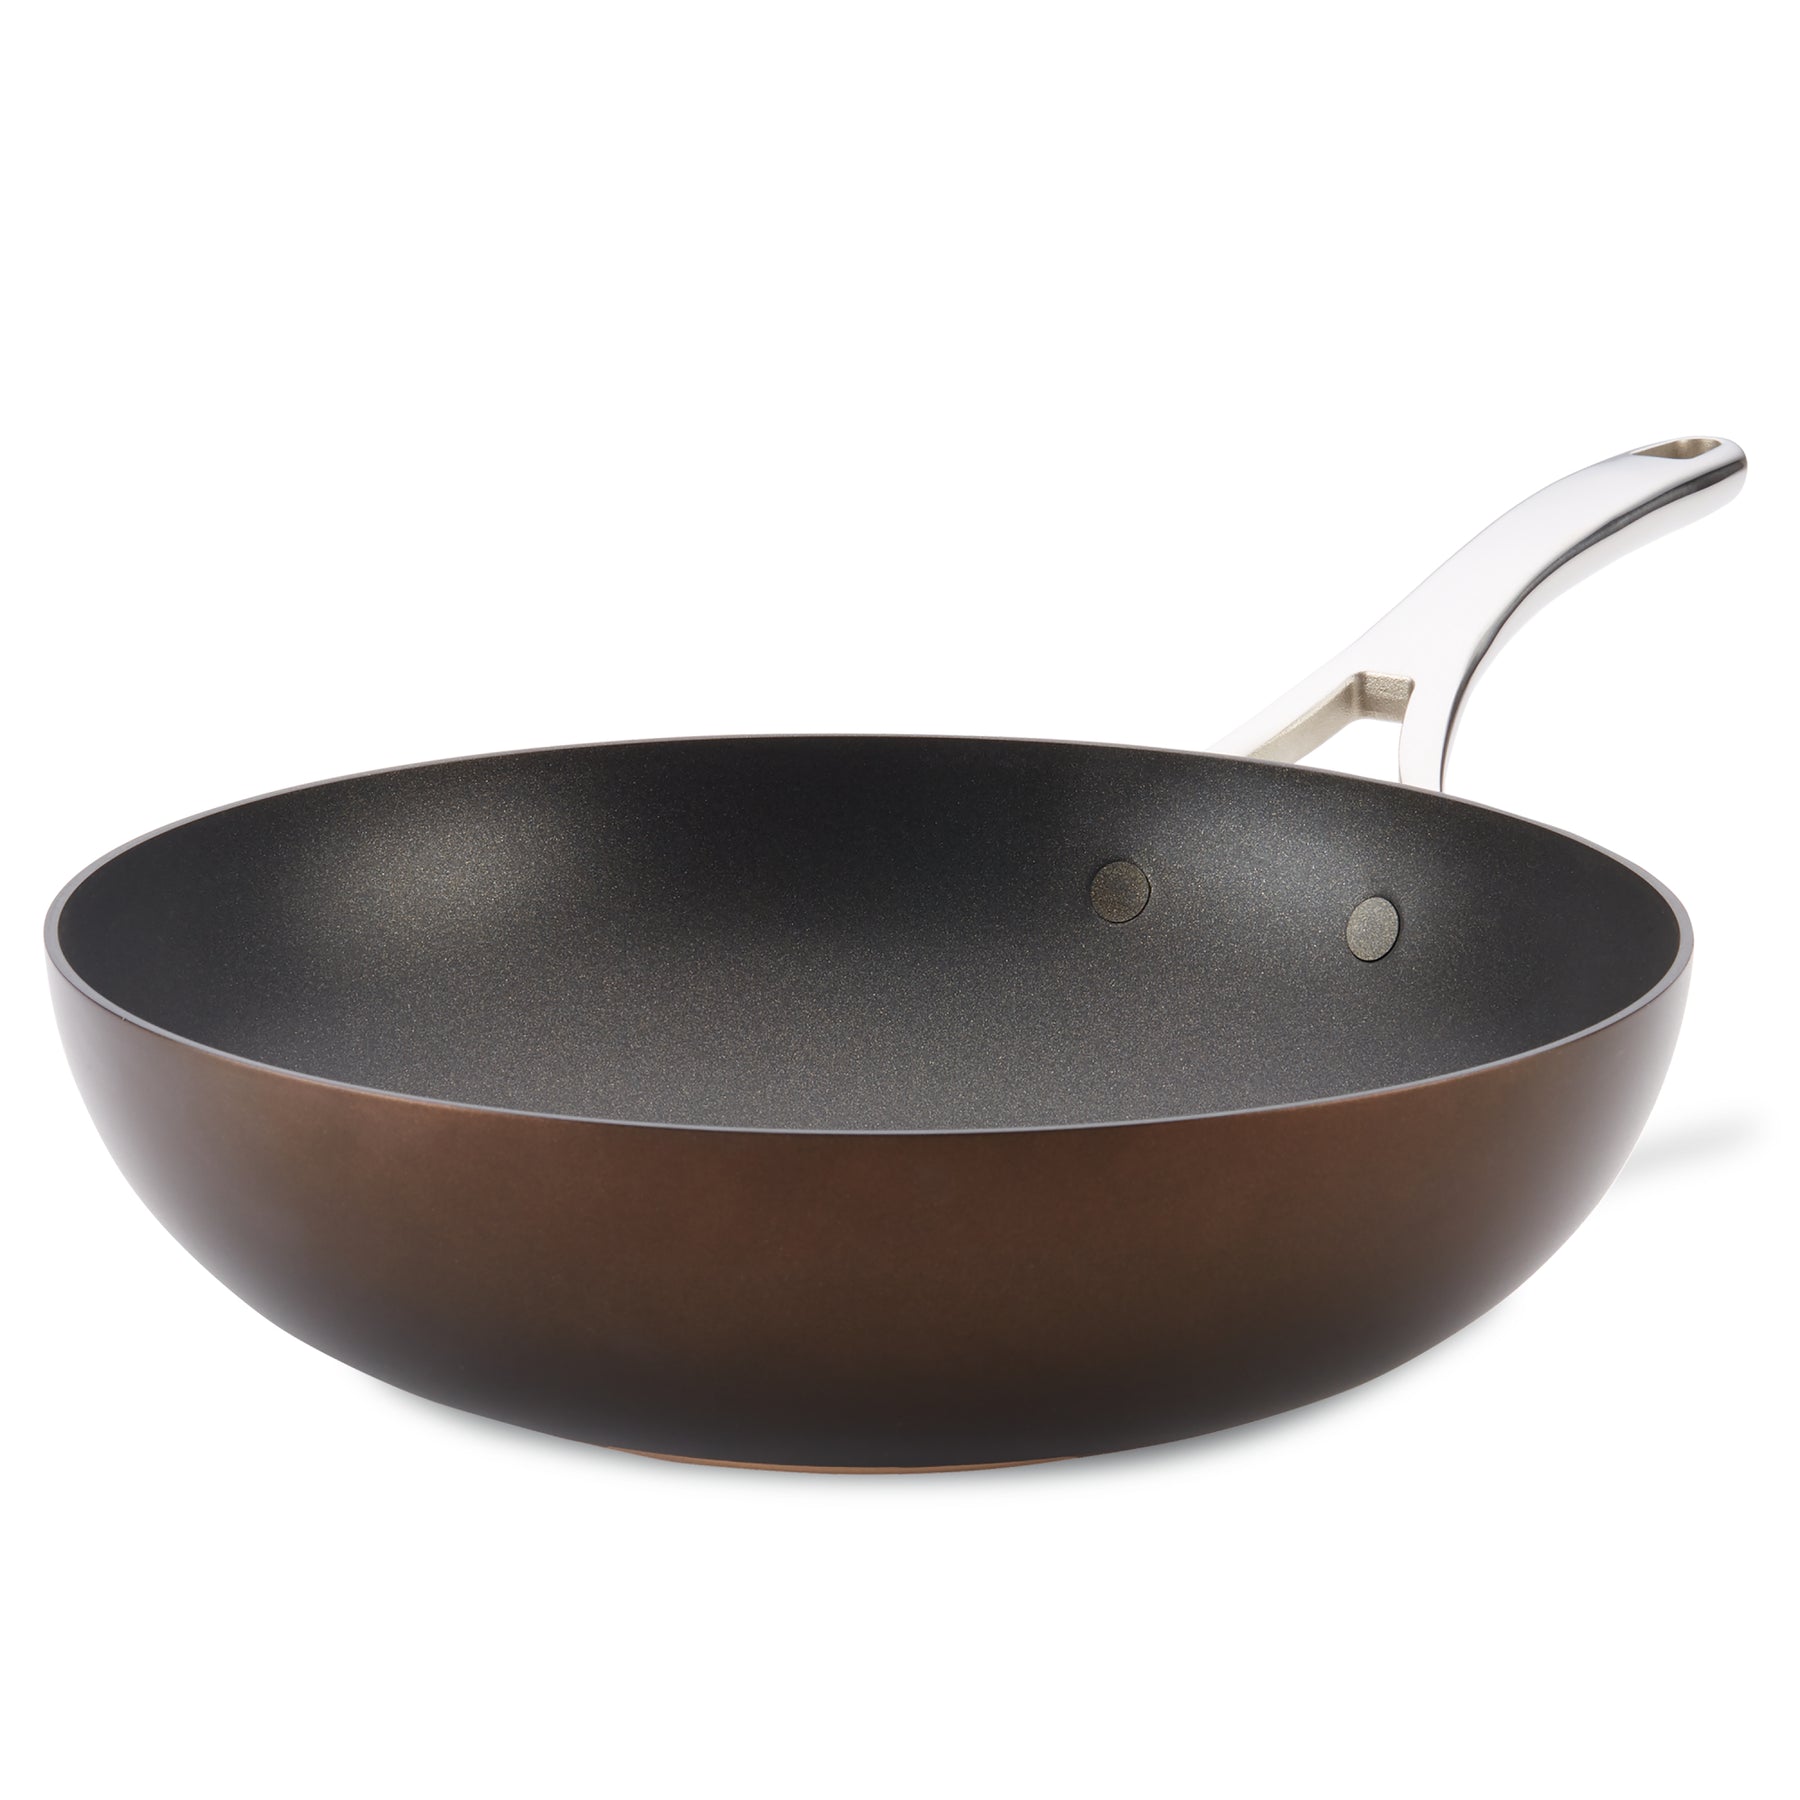 Wholesale 11 Copper Griddle Pan with Stainless Steel Handle COPPER